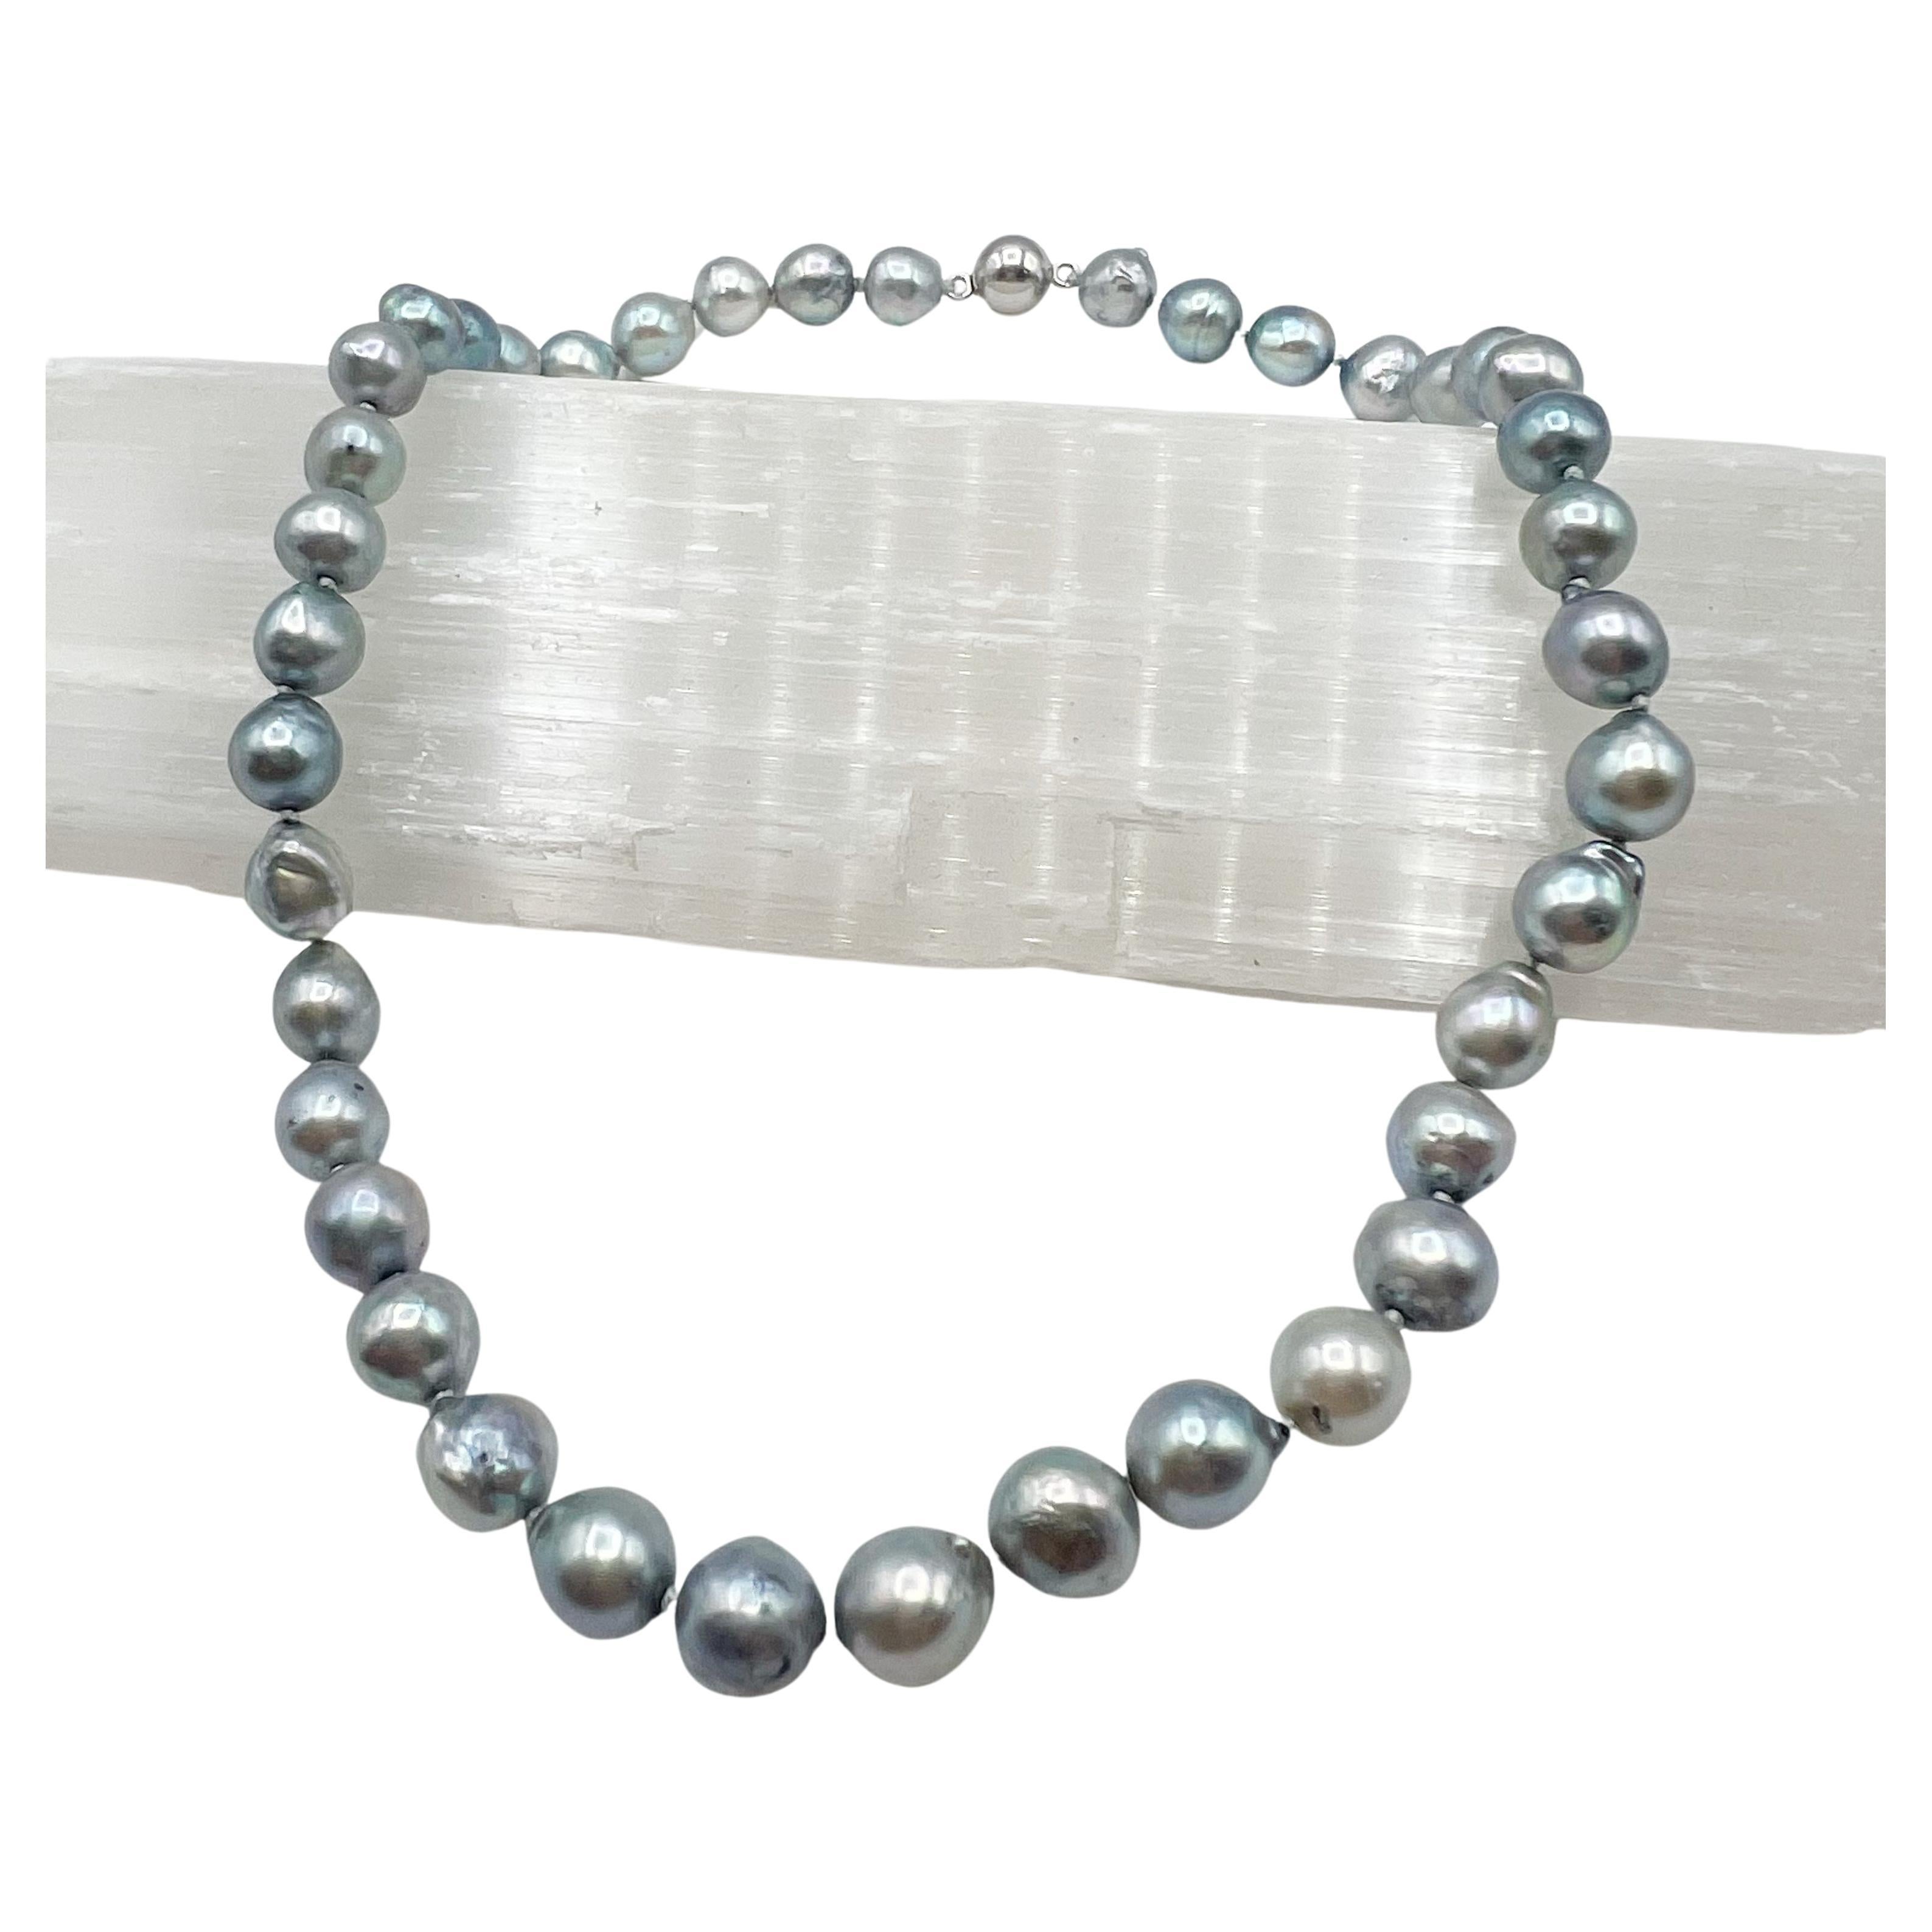 Blue Saltwater Pearl Necklace with 14 Karat White Gold Clasp